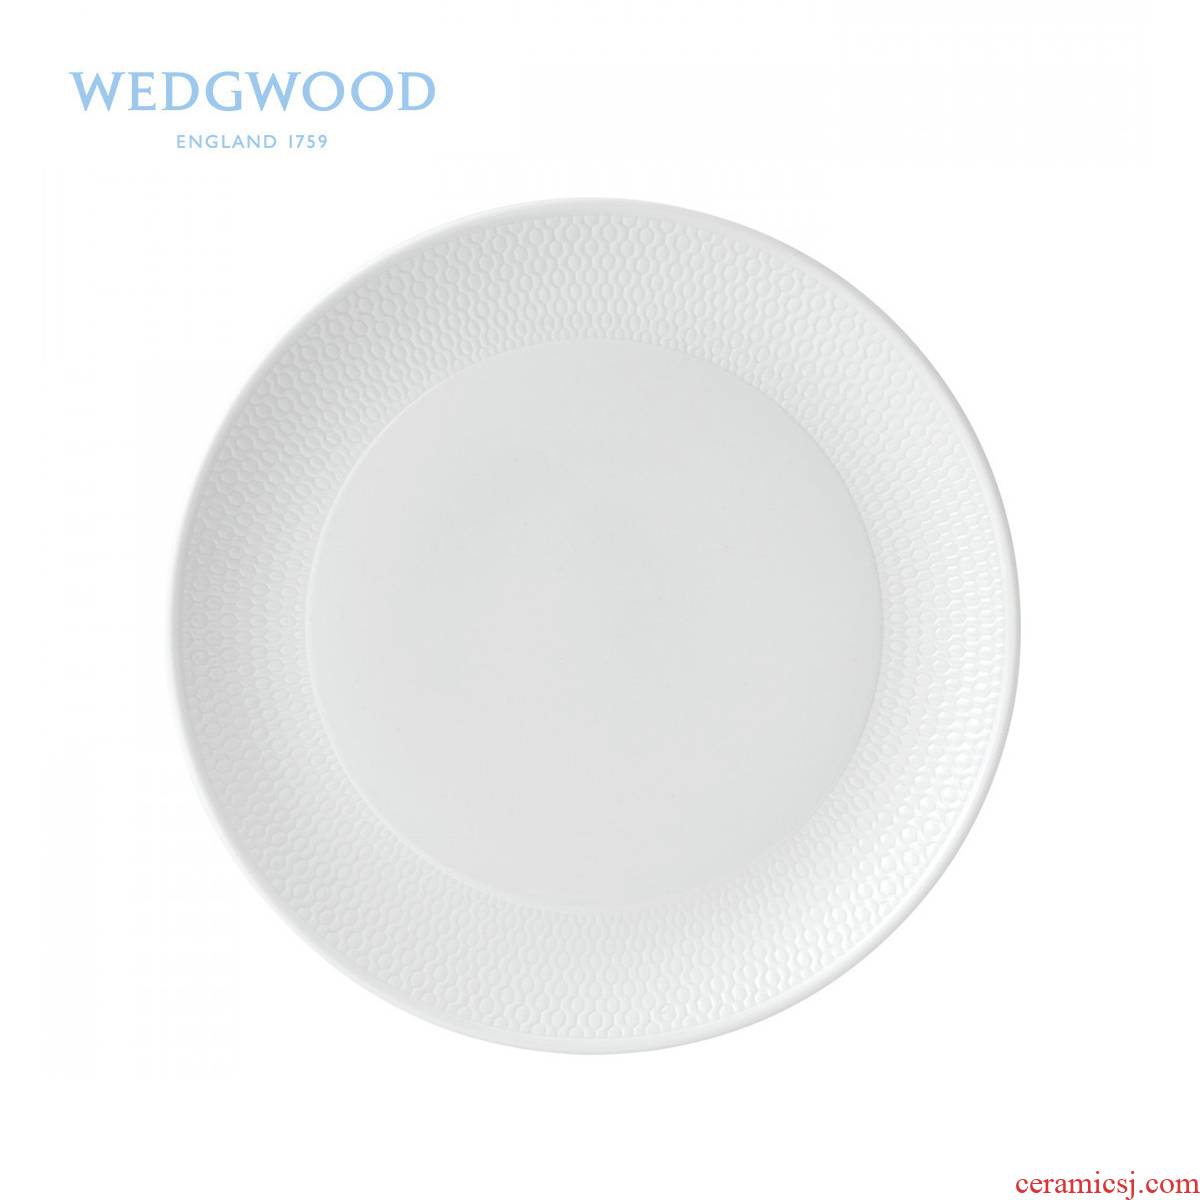 Wedgwood waterford Wedgwood Gio honeycomb 23 cm series flat single ipads porcelain snack plate/cold dish plate